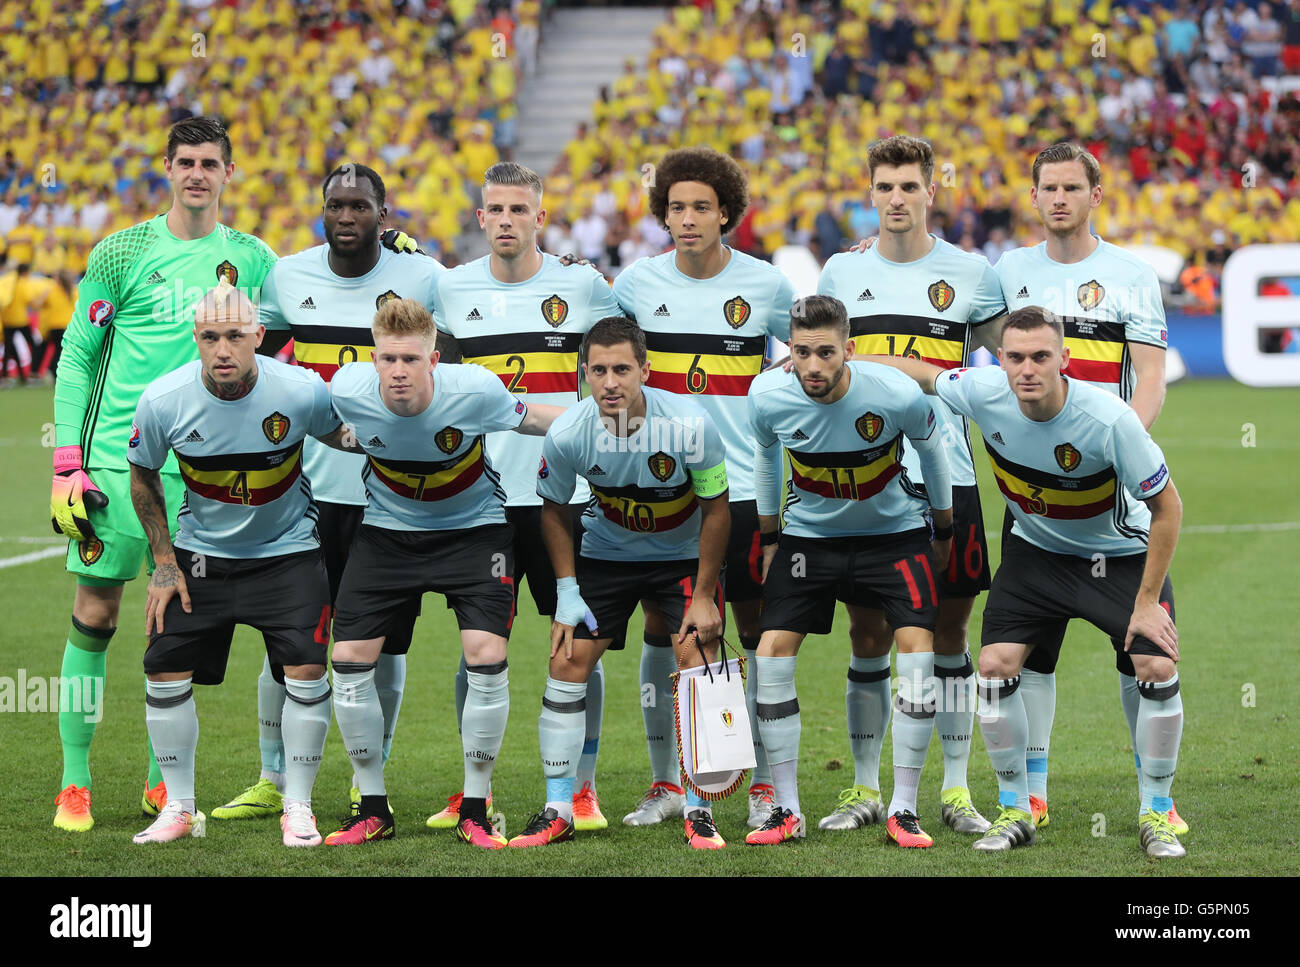 Nice, France. 22nd June, 2016. Players of Belgium national football team pose for a group photo before UEFA EURO 2016 game against Sweden at Allianz Riviera Stade de Nice, Nice, France. Credit:  Oleksandr Prykhodko/Alamy Live News Stock Photo